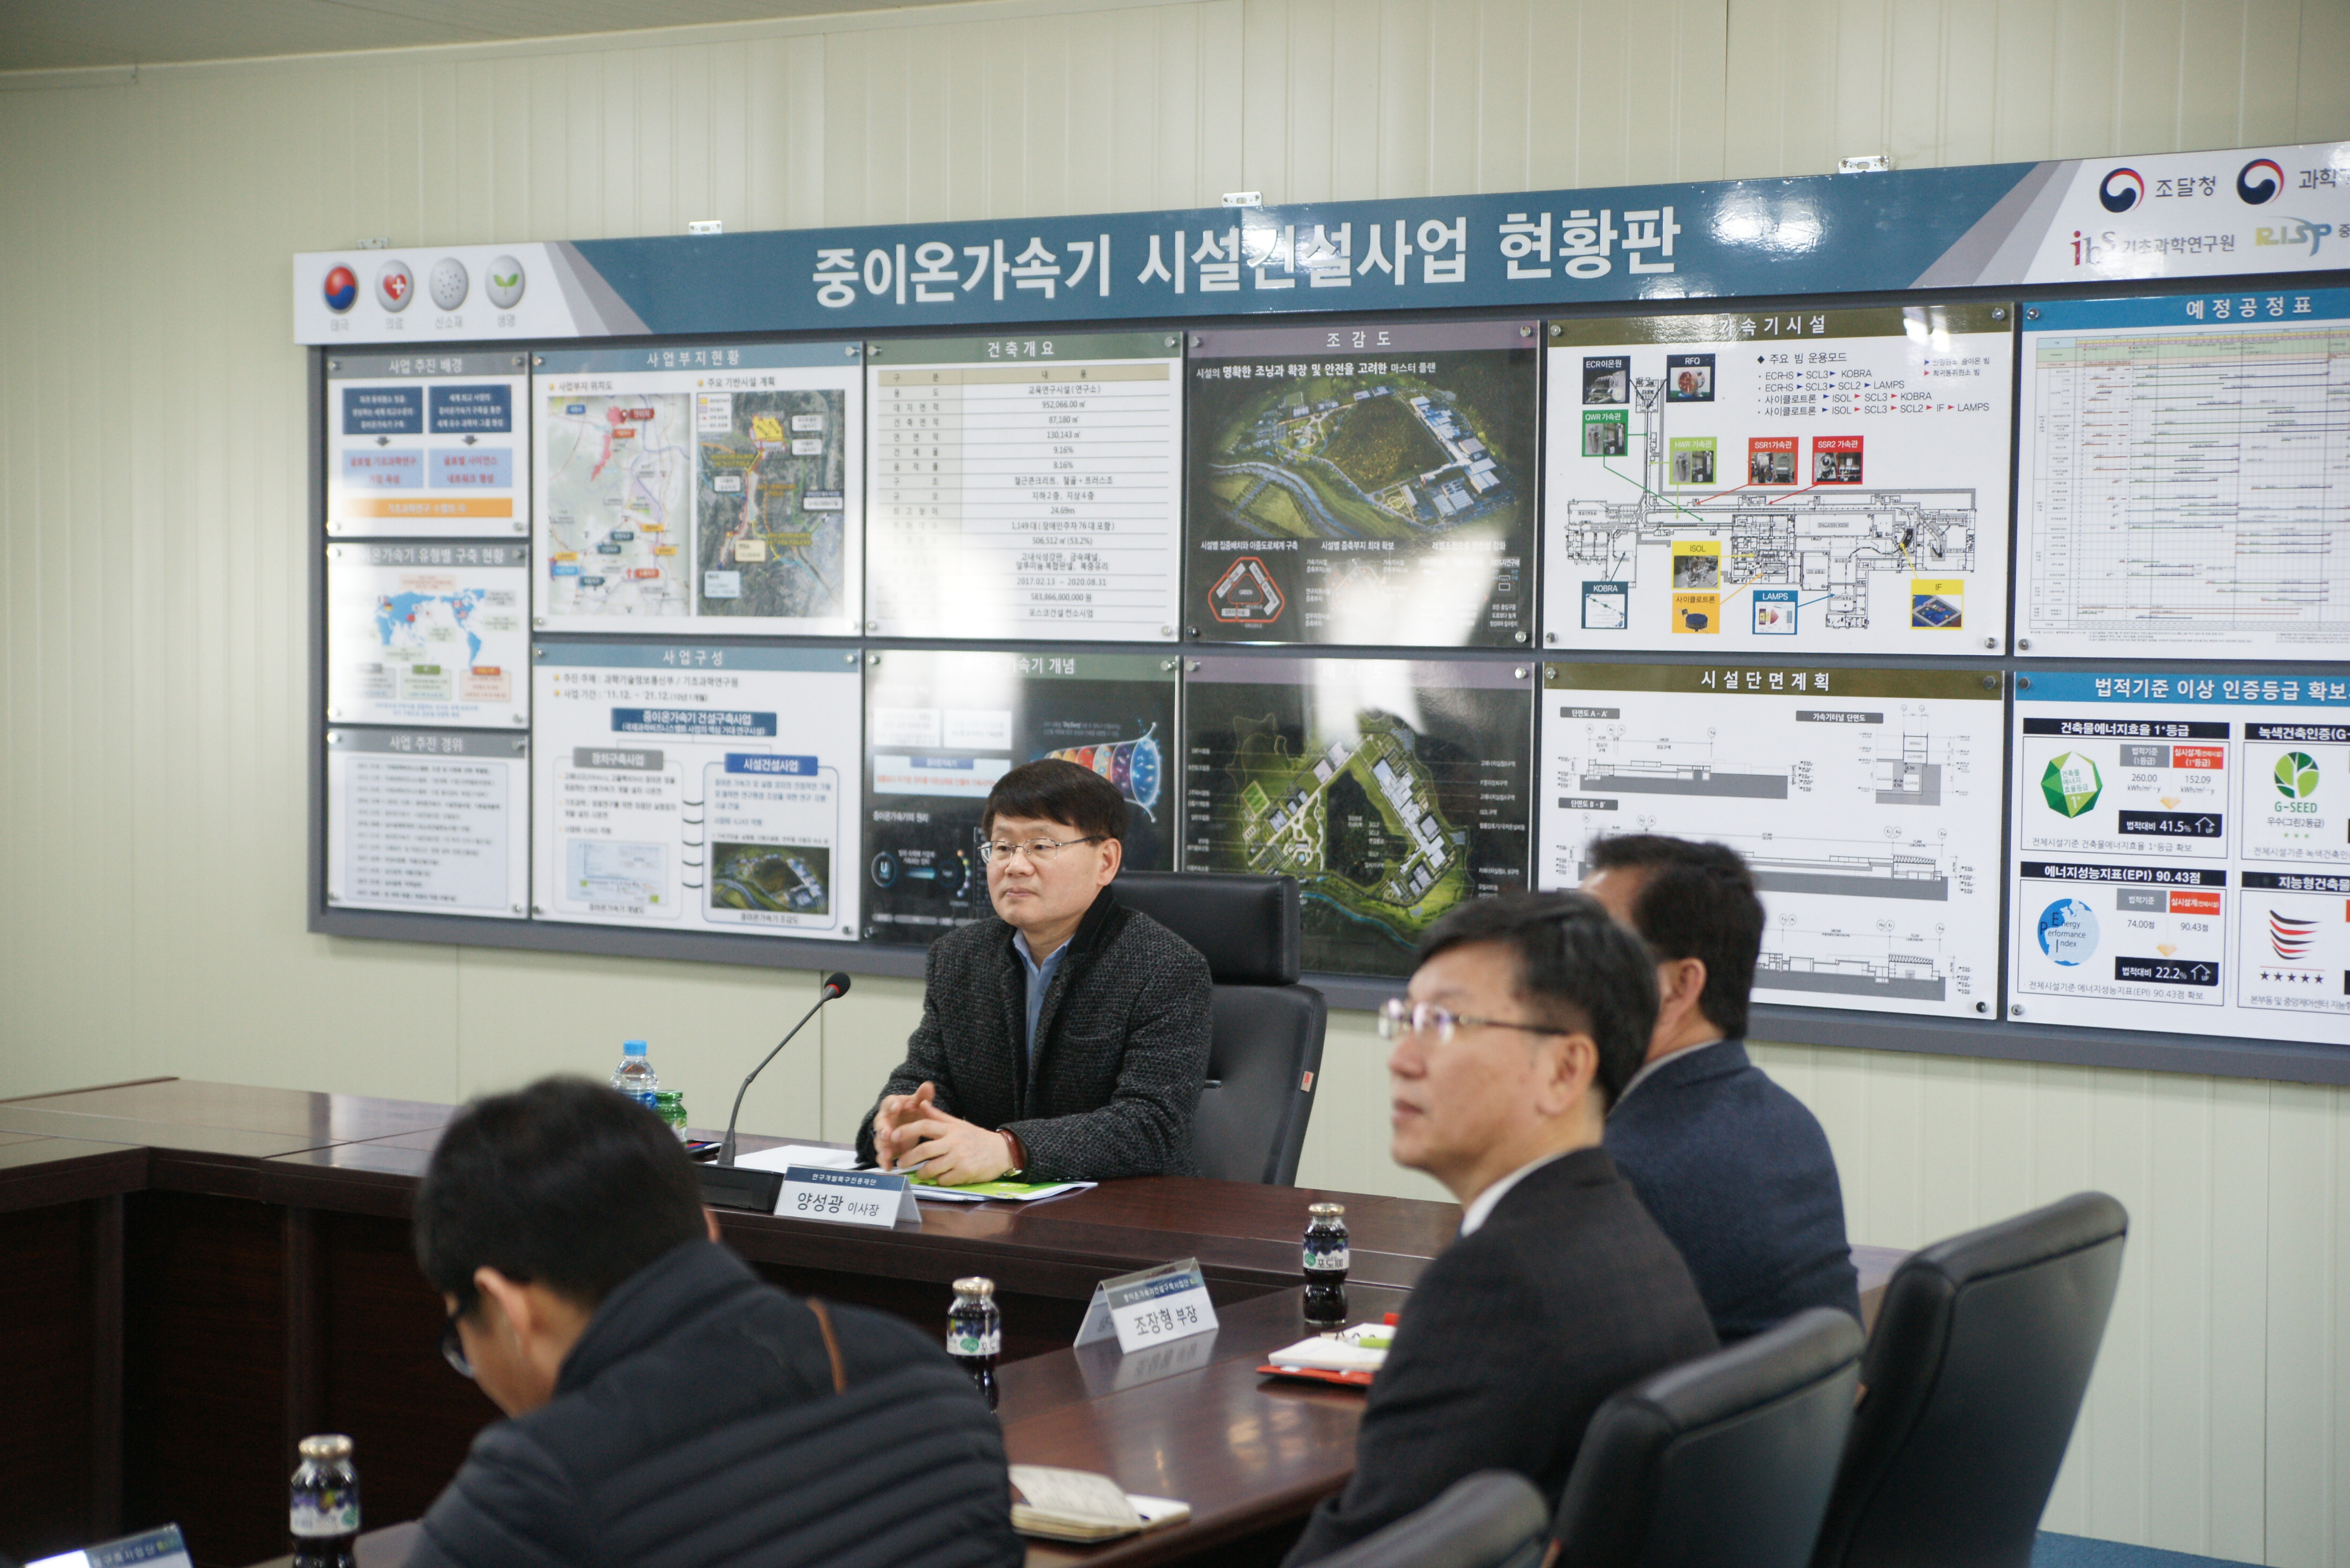 Sung-kwang Yang, the chairman of INNOPOLIS Foundation visited the site of Science Belt Base (Shindong, Doongok) to encourage the people